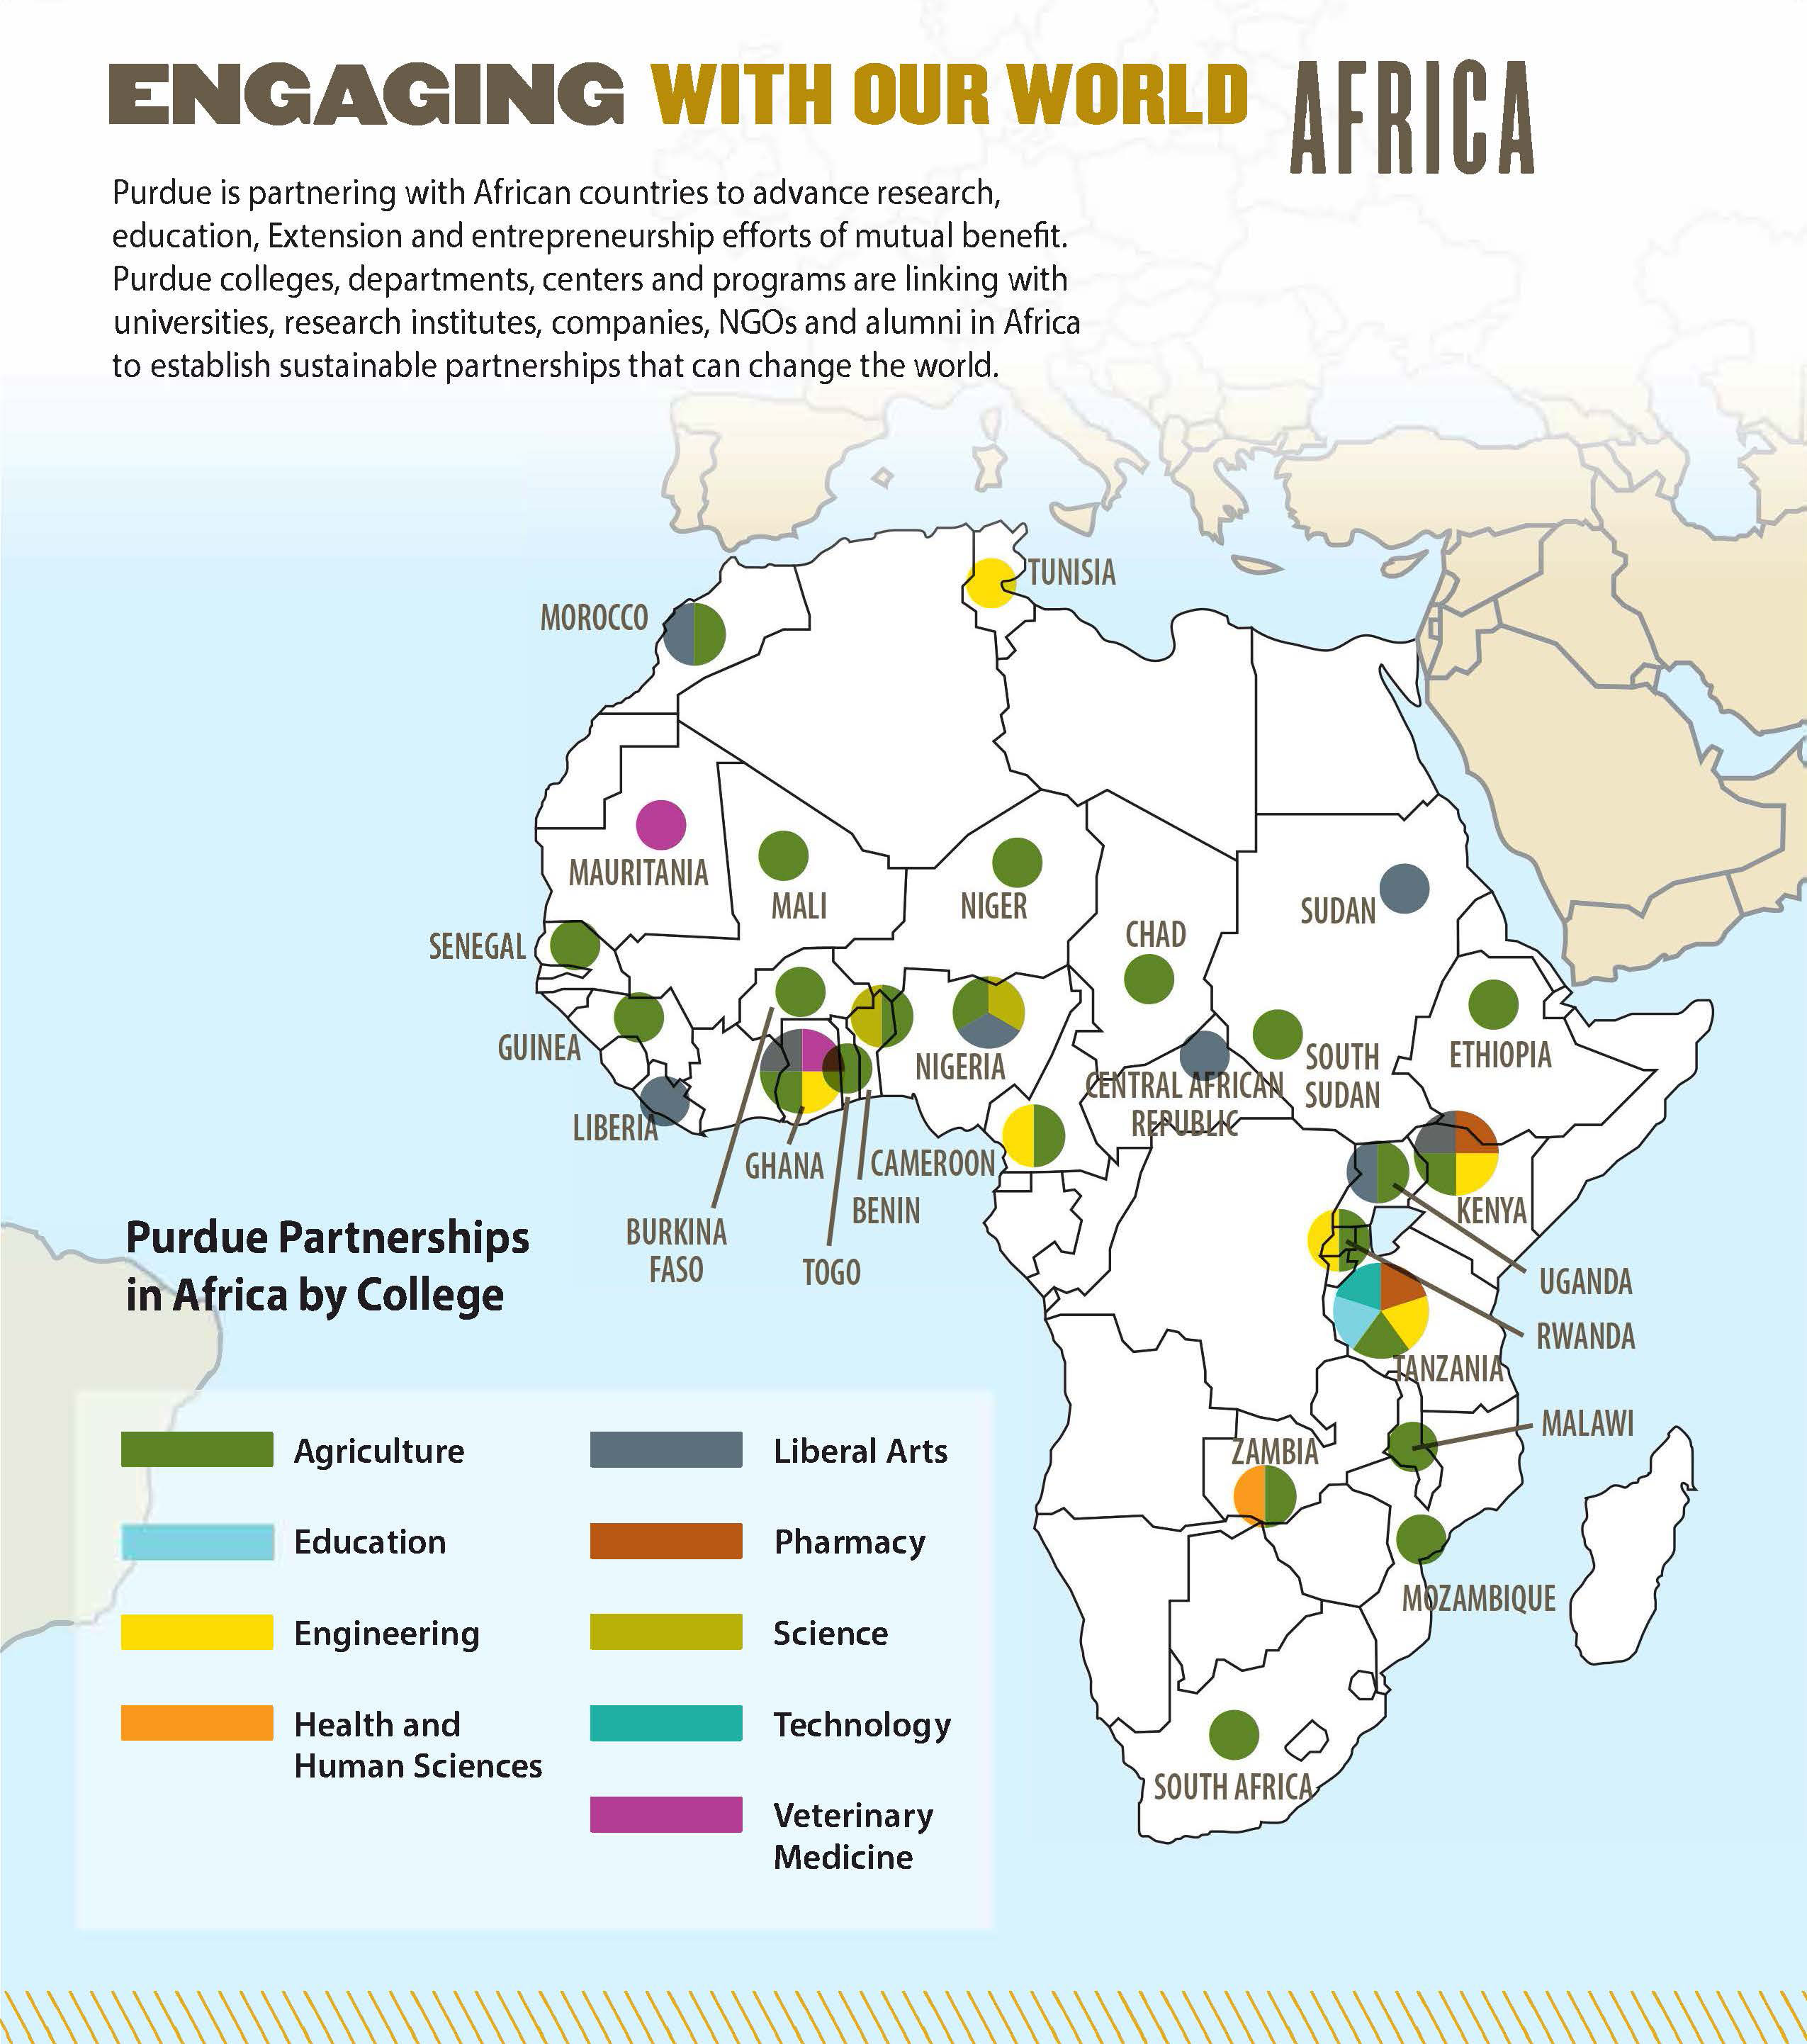 Map of Purdue partnerships in Africa